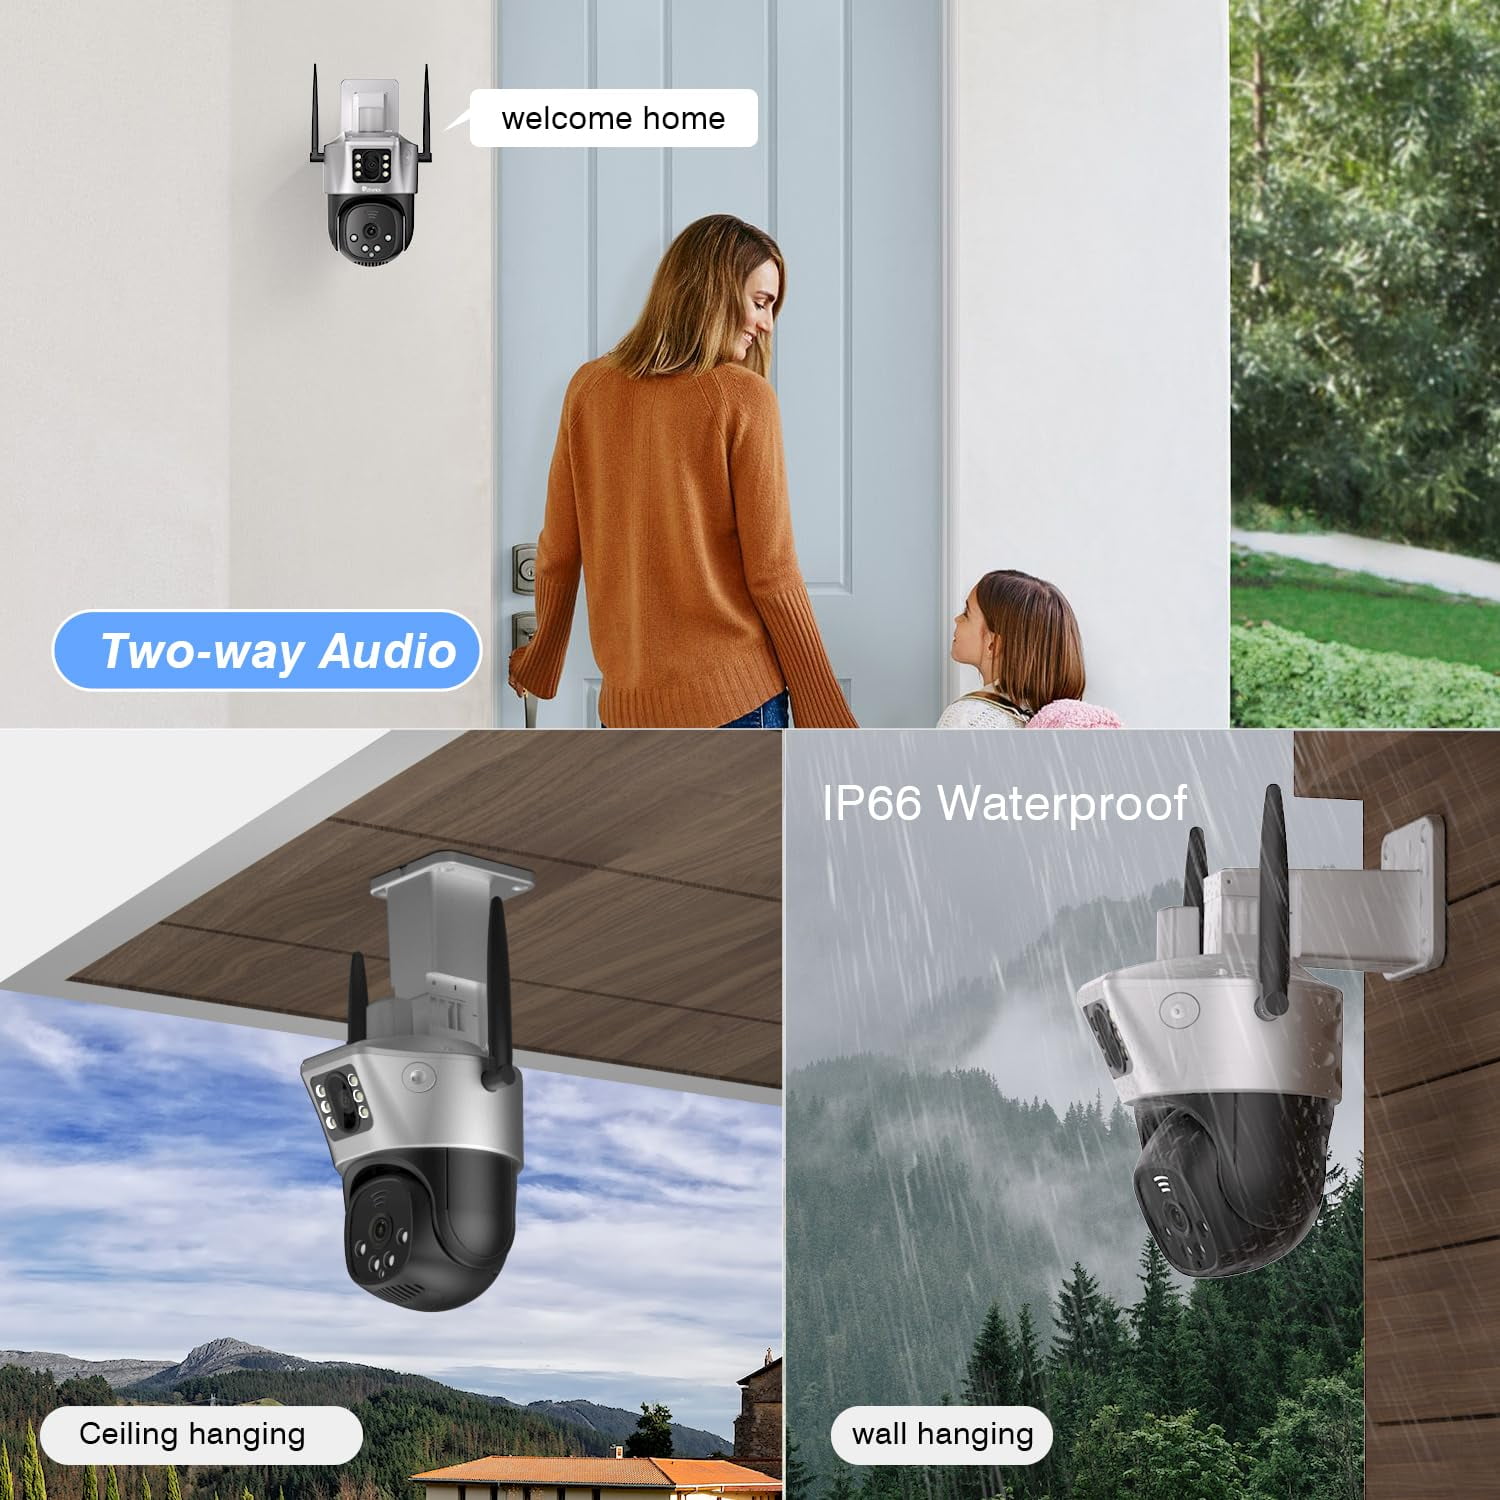 Ctronics Dual Lens Indoor Security Camera WiFi with 6X Hybrid Zoom